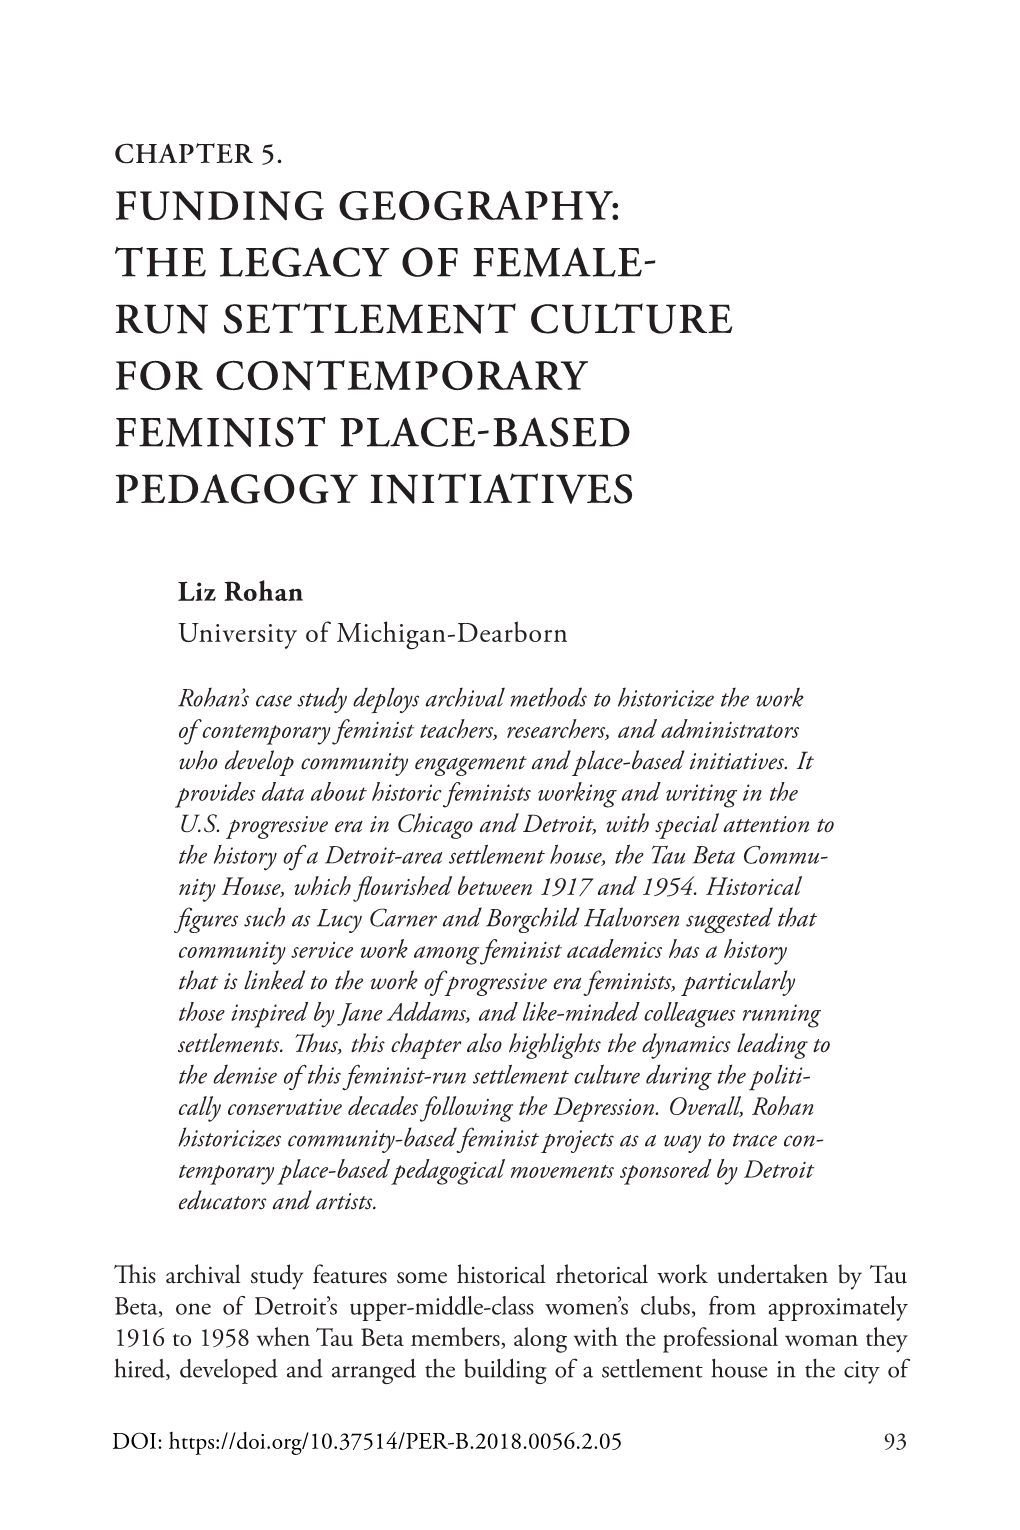 Run Settlement Culture for Contemporary Feminist Place-Based Pedagogy Initiatives